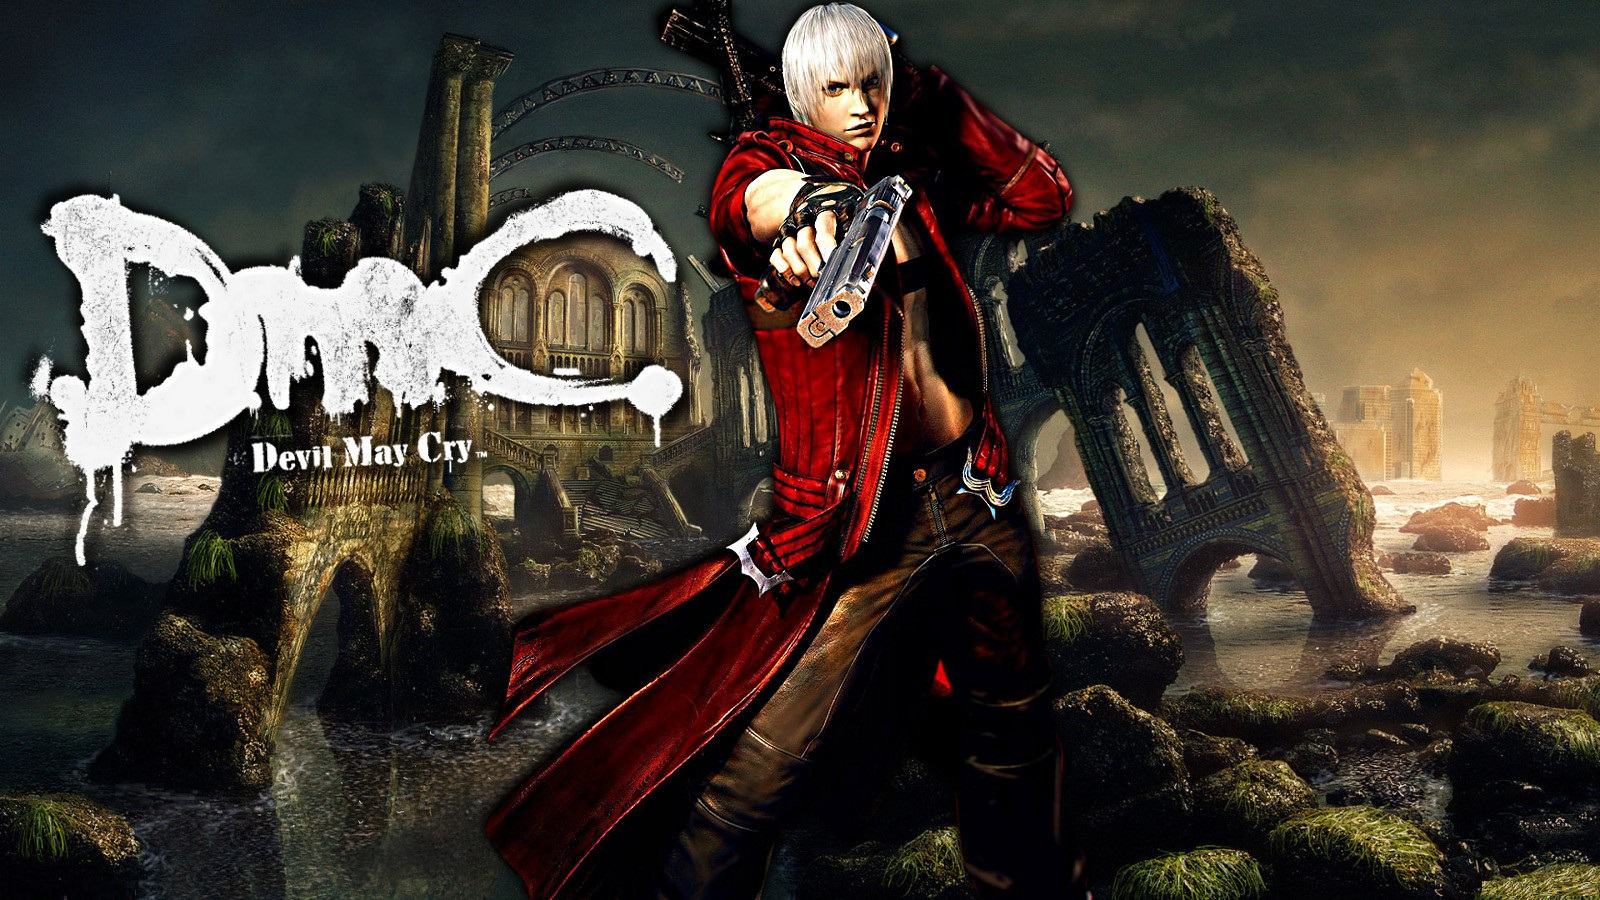 devil-may-cry-wallpaper-1600x900-by-patrice.jpg